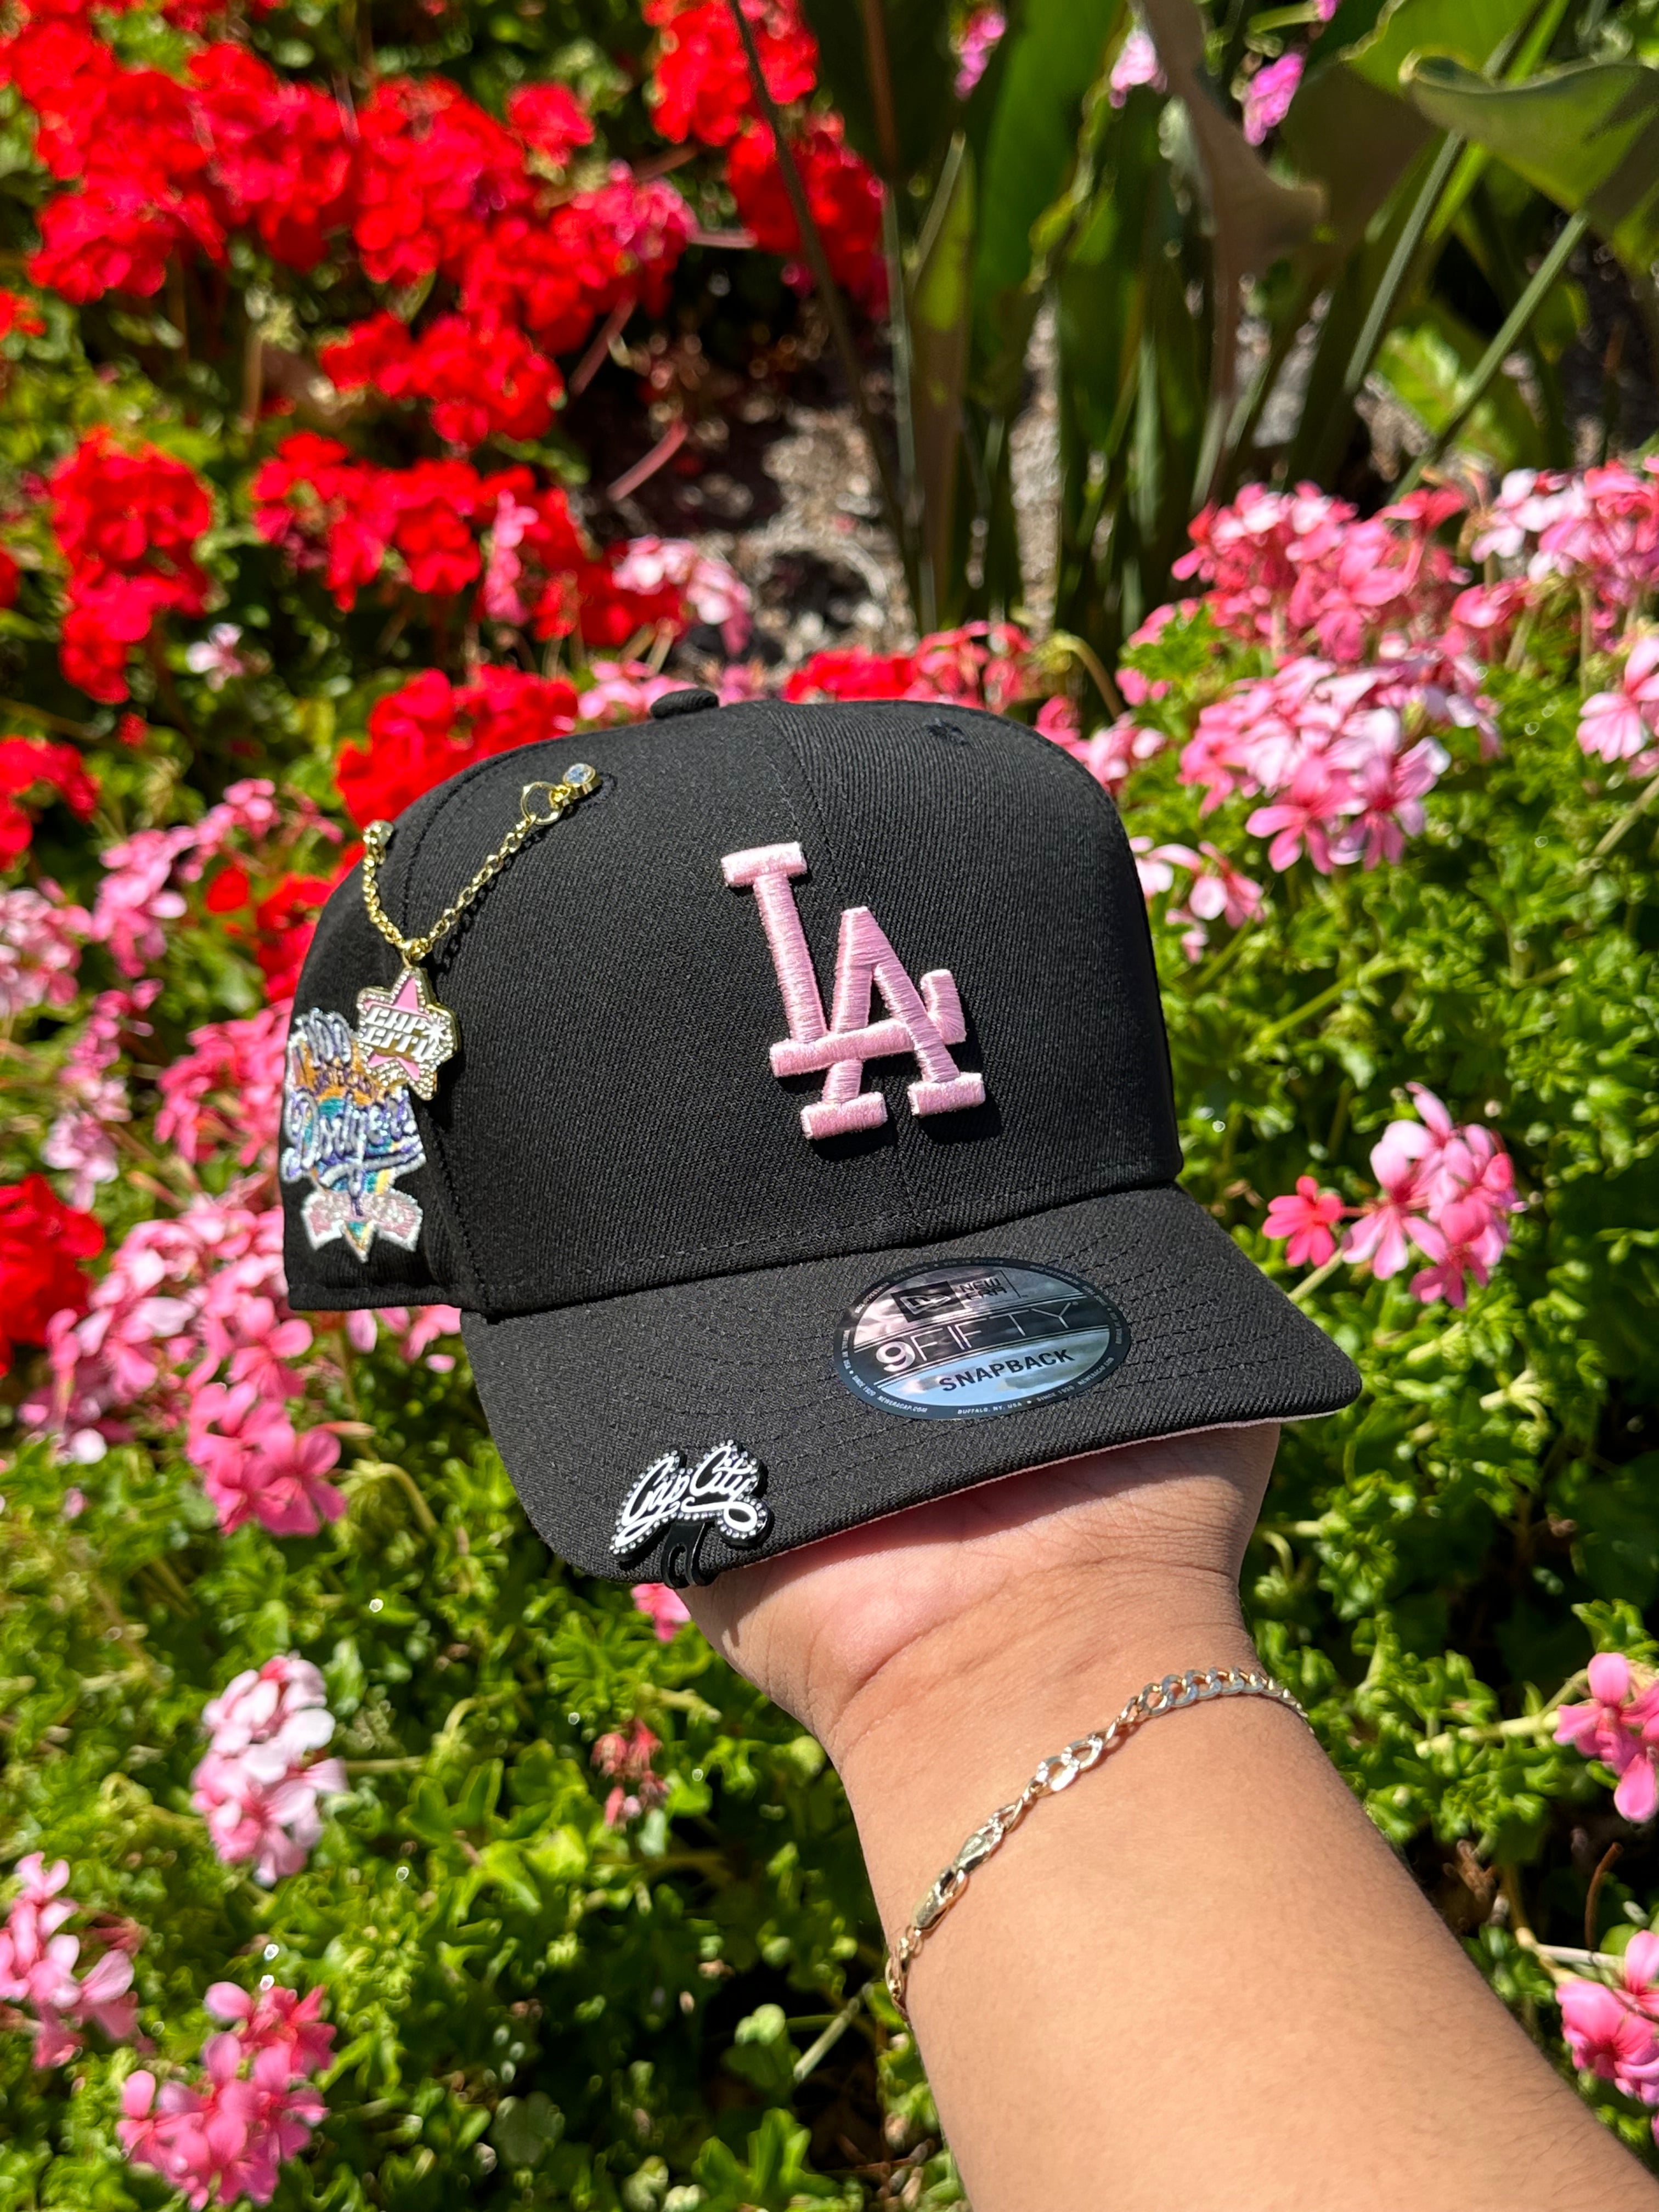 NEW ERA EXCLUSIVE 9FIFTY BLACK LOS ANGELES DODGERS SNAPBACK W/ 100TH ANNIVERSARY PATCH